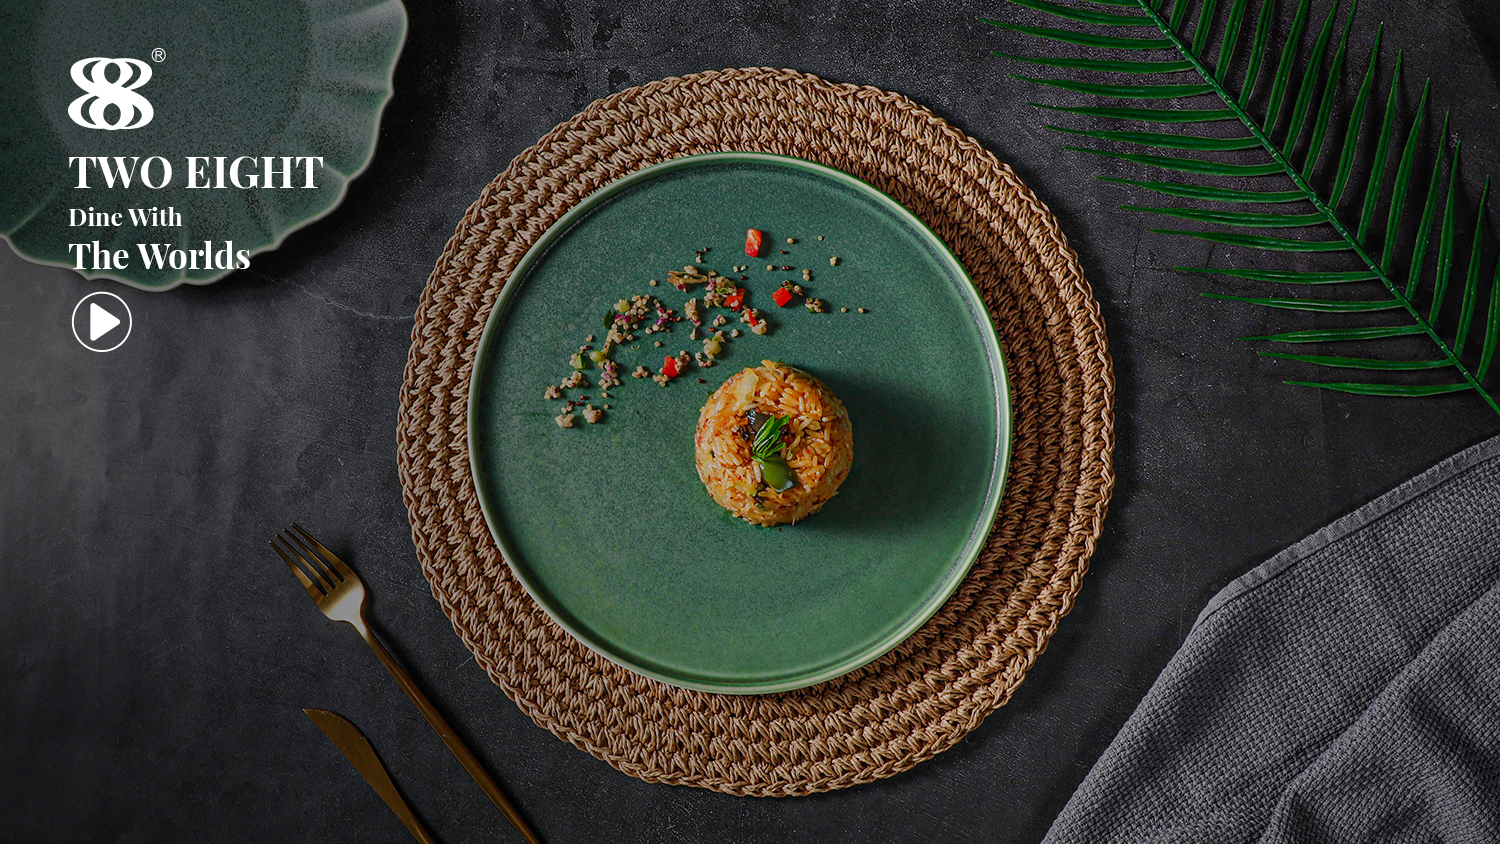 QING LI SERIES- 2021 New Special Color Matte Dinnerware, Unique shape brings different feeling on table